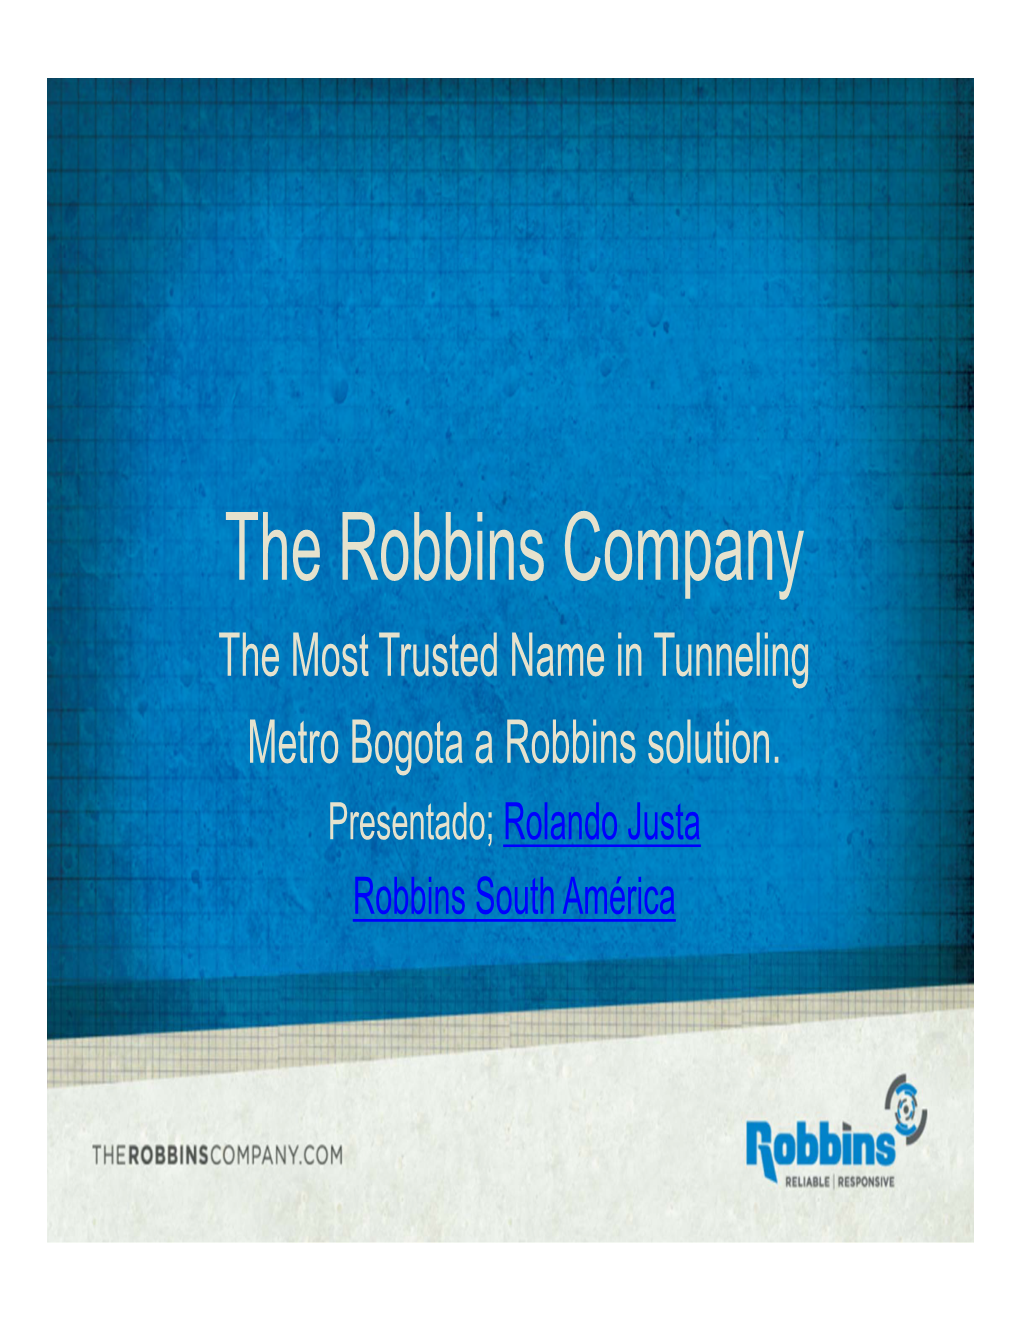 The Robbins Company the Most Trusted Name in Tunneling Metro Bogota a Robbins Solution